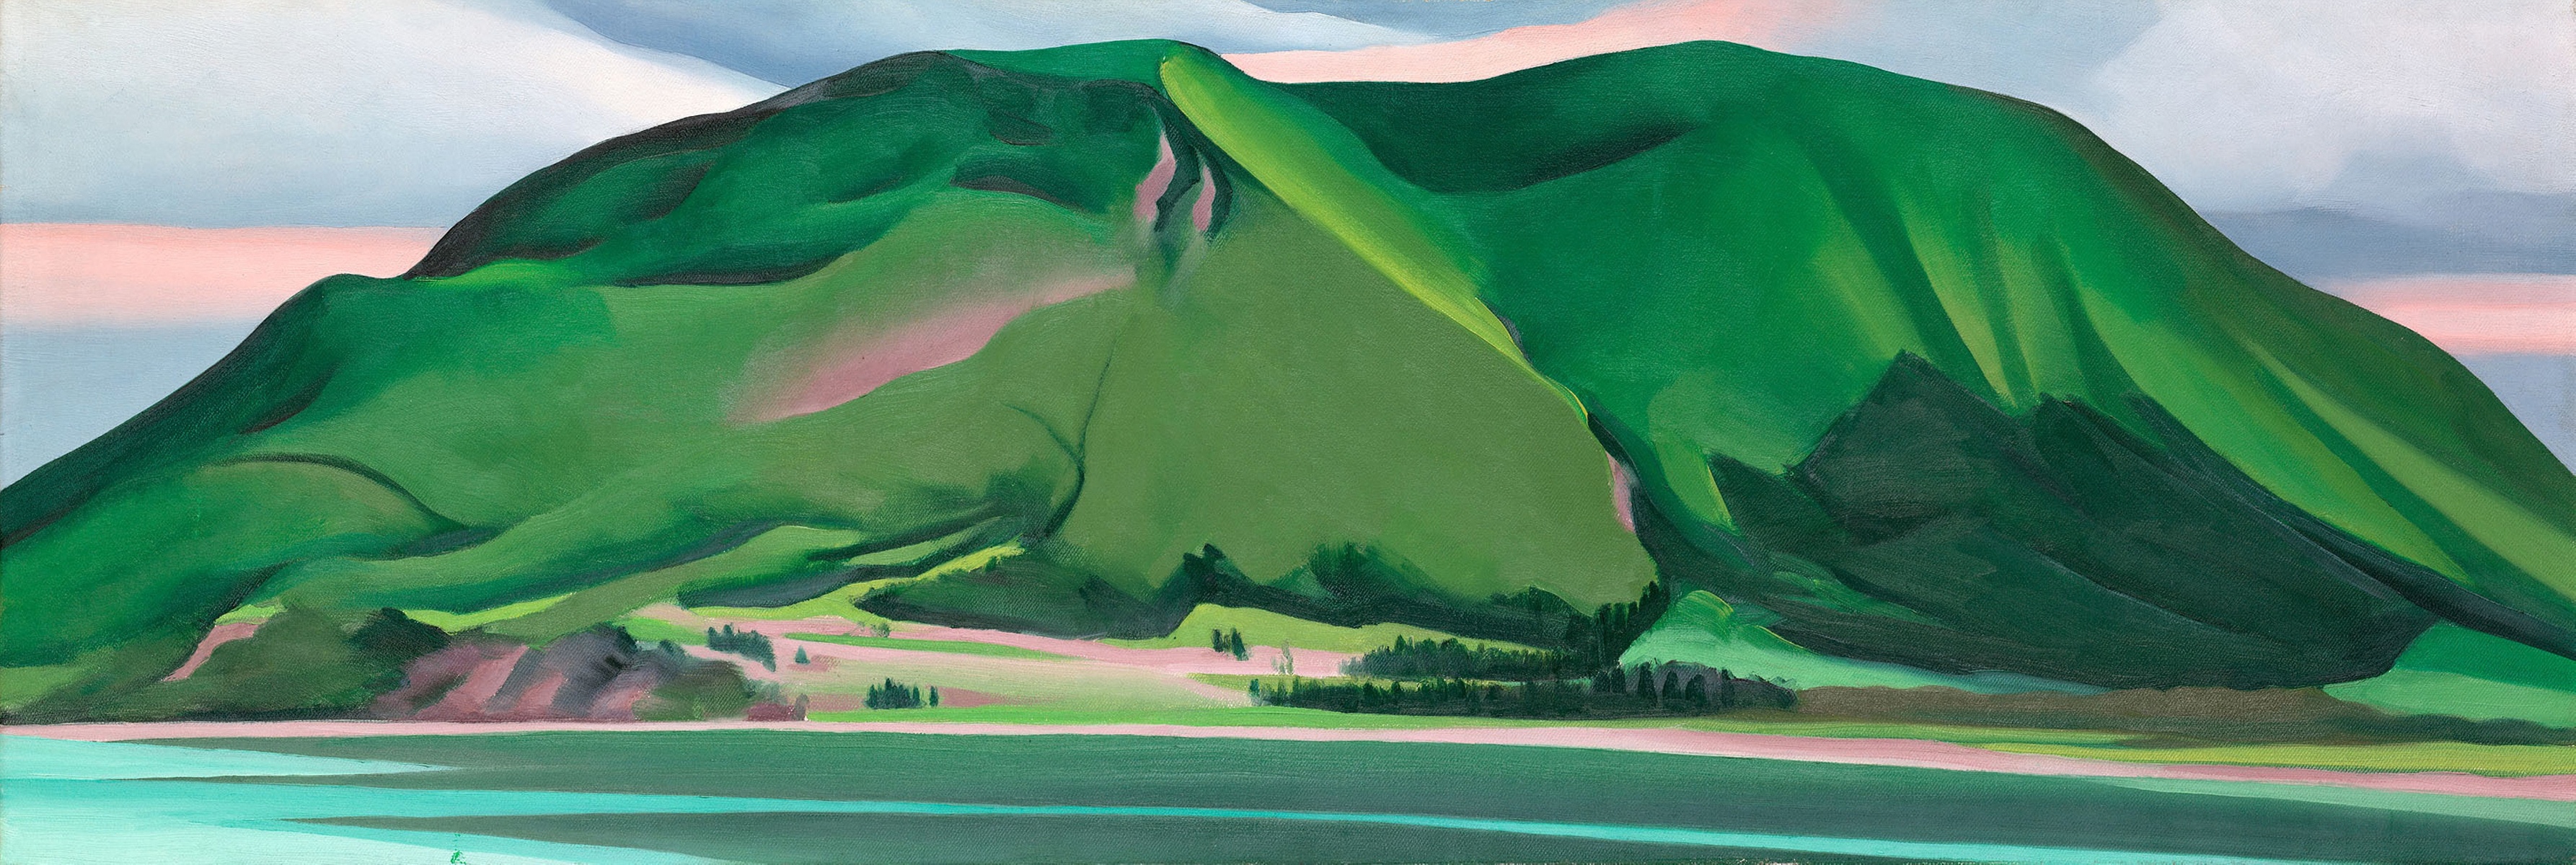 Georgia O'Keeffe. Green Mountains, Canada. 1932. Source: Art Institute of Chicago